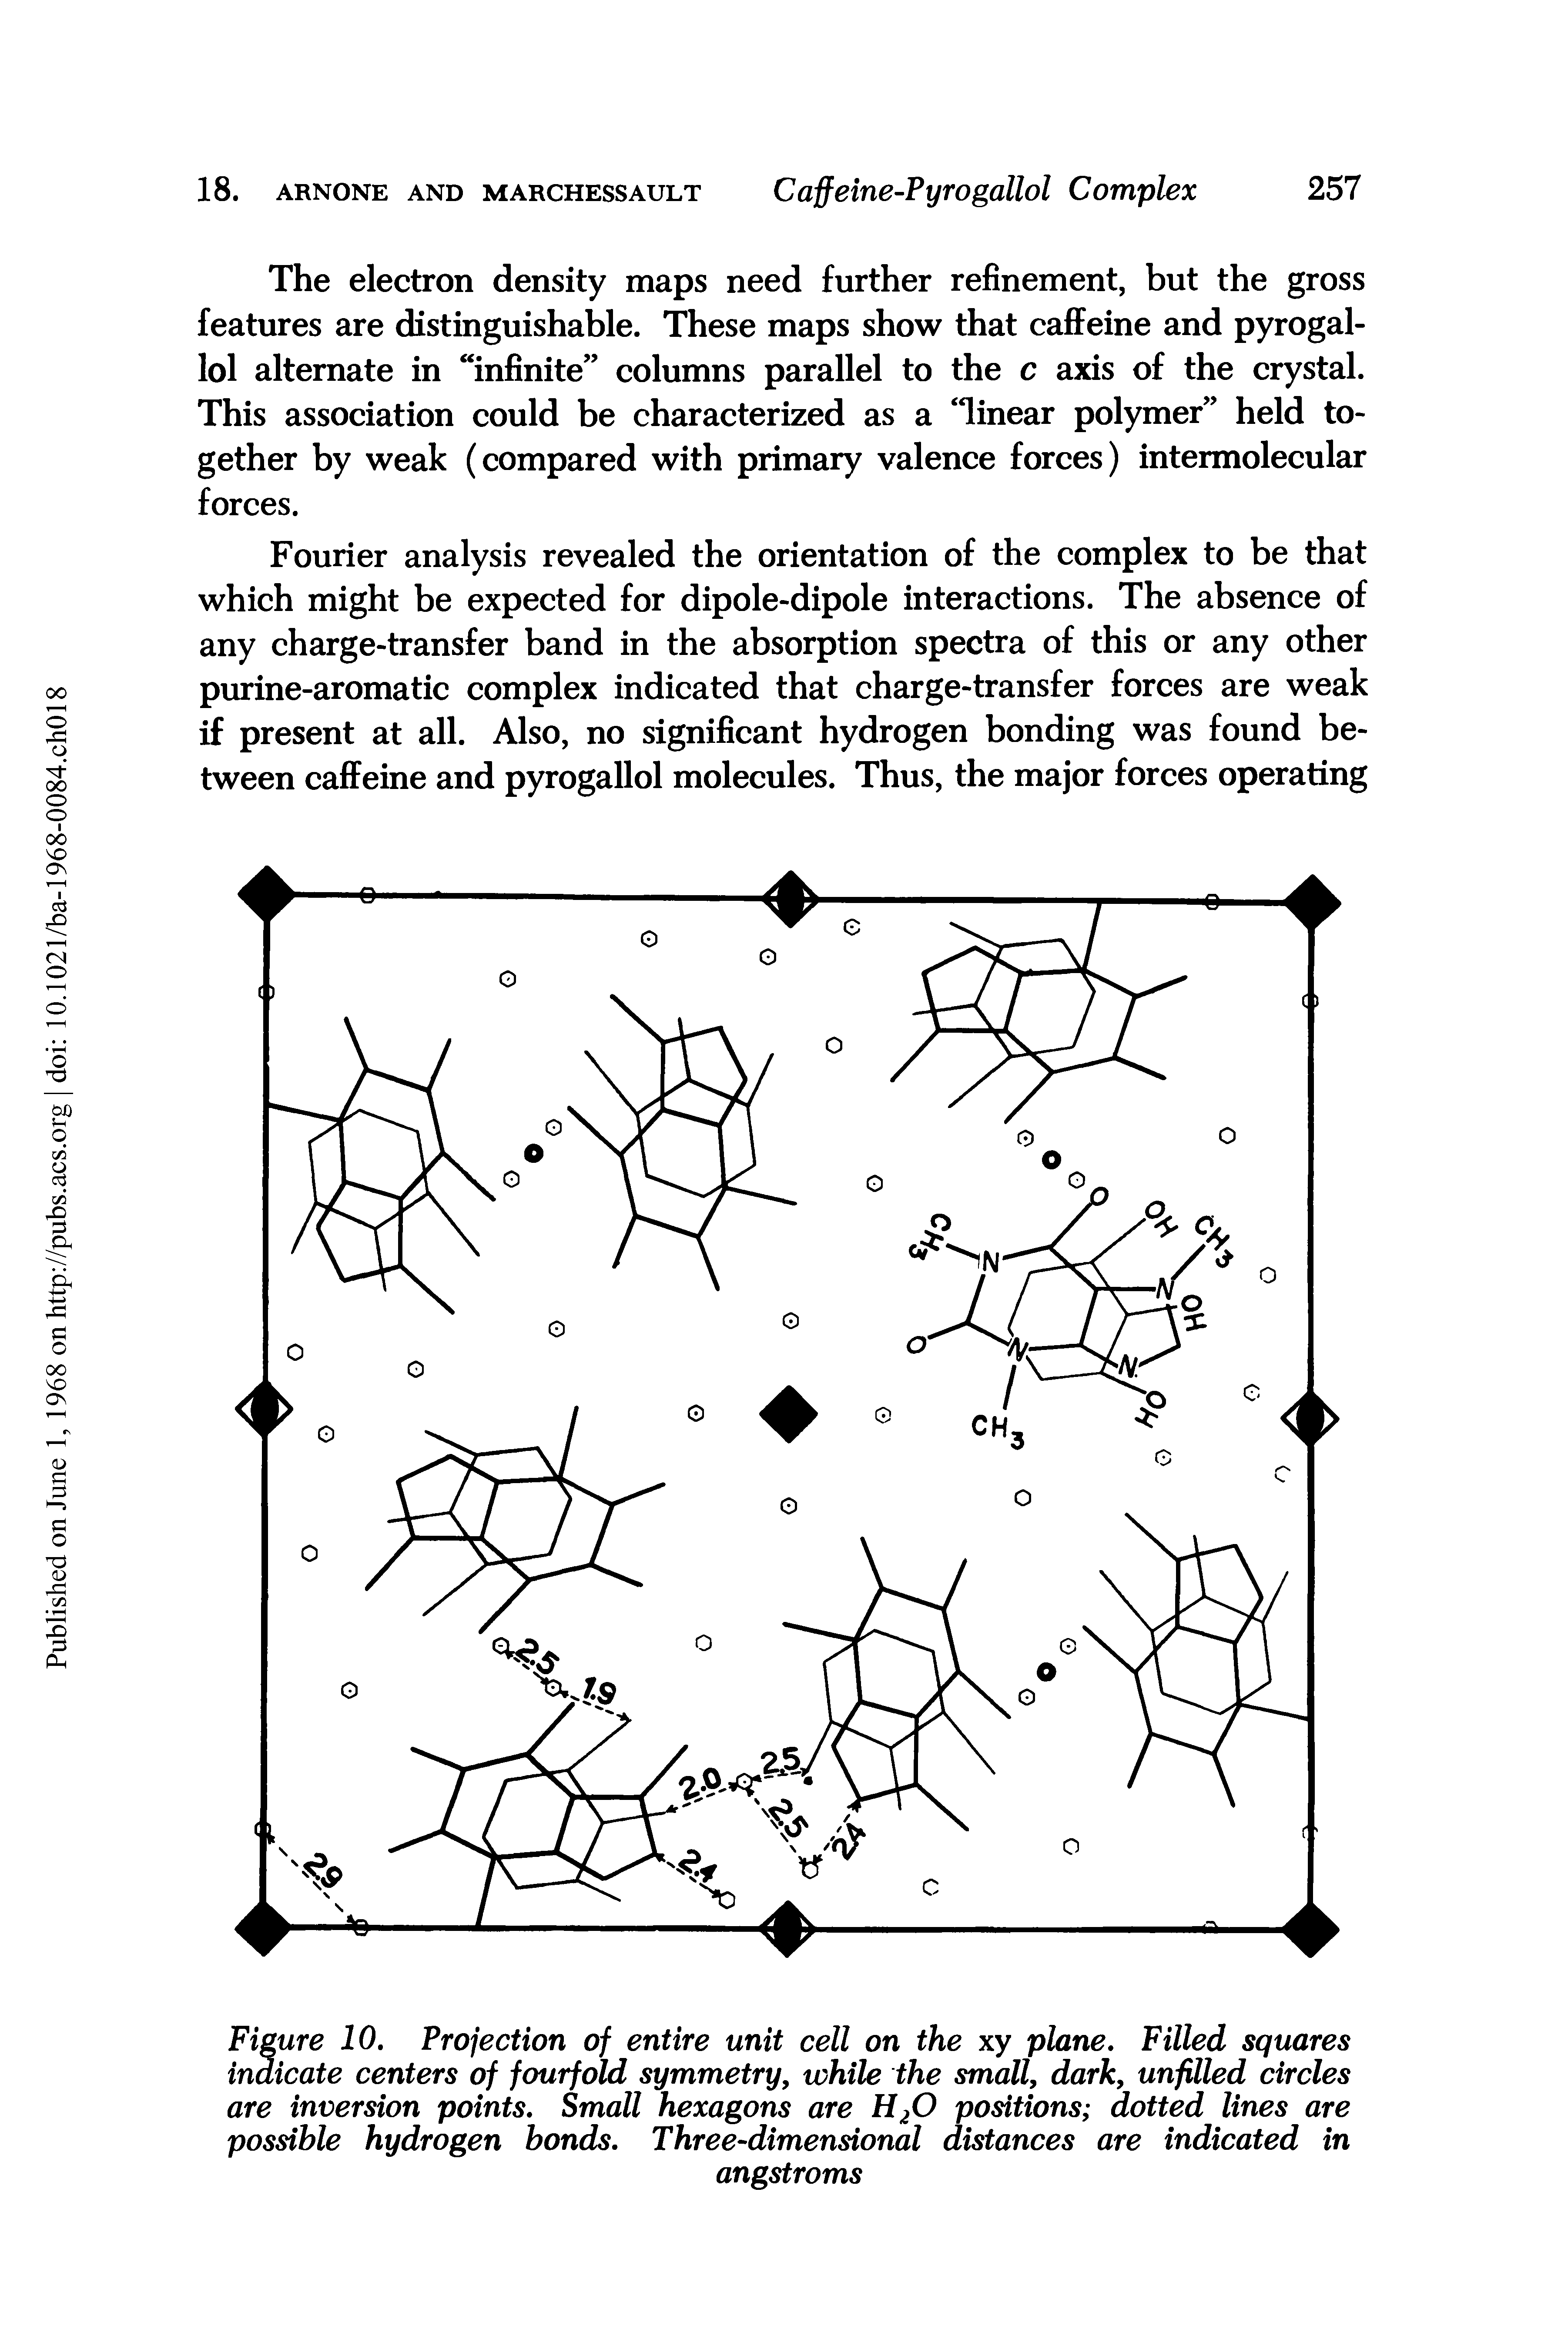 Figure 10. Projection of entire unit cell on the xy plane. Filled squares indicate centers of fourfold symmetry, while the small, dark, unfilled circles are inversion points. Small hexagons are H20 positions dotted lines are possible hydrogen bonds. Three-dimensional distances are indicated in...